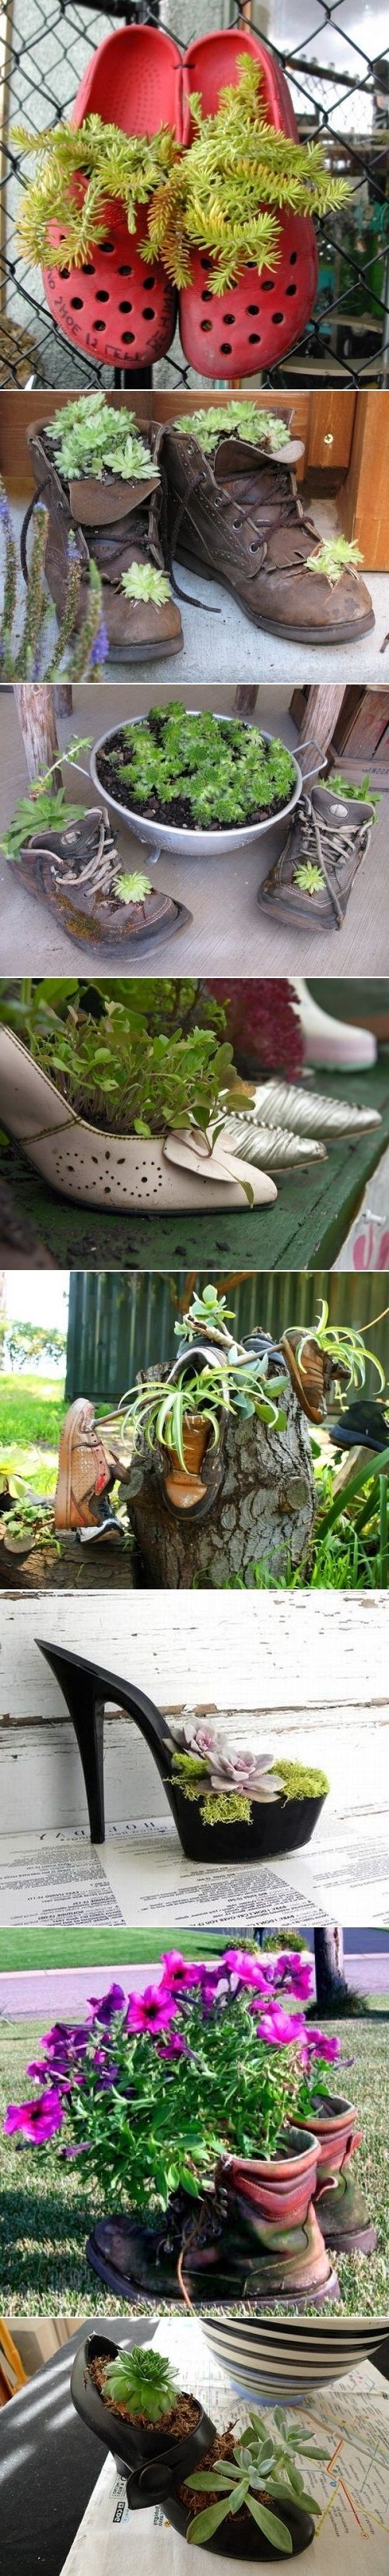 Use Old Shoes As Planters